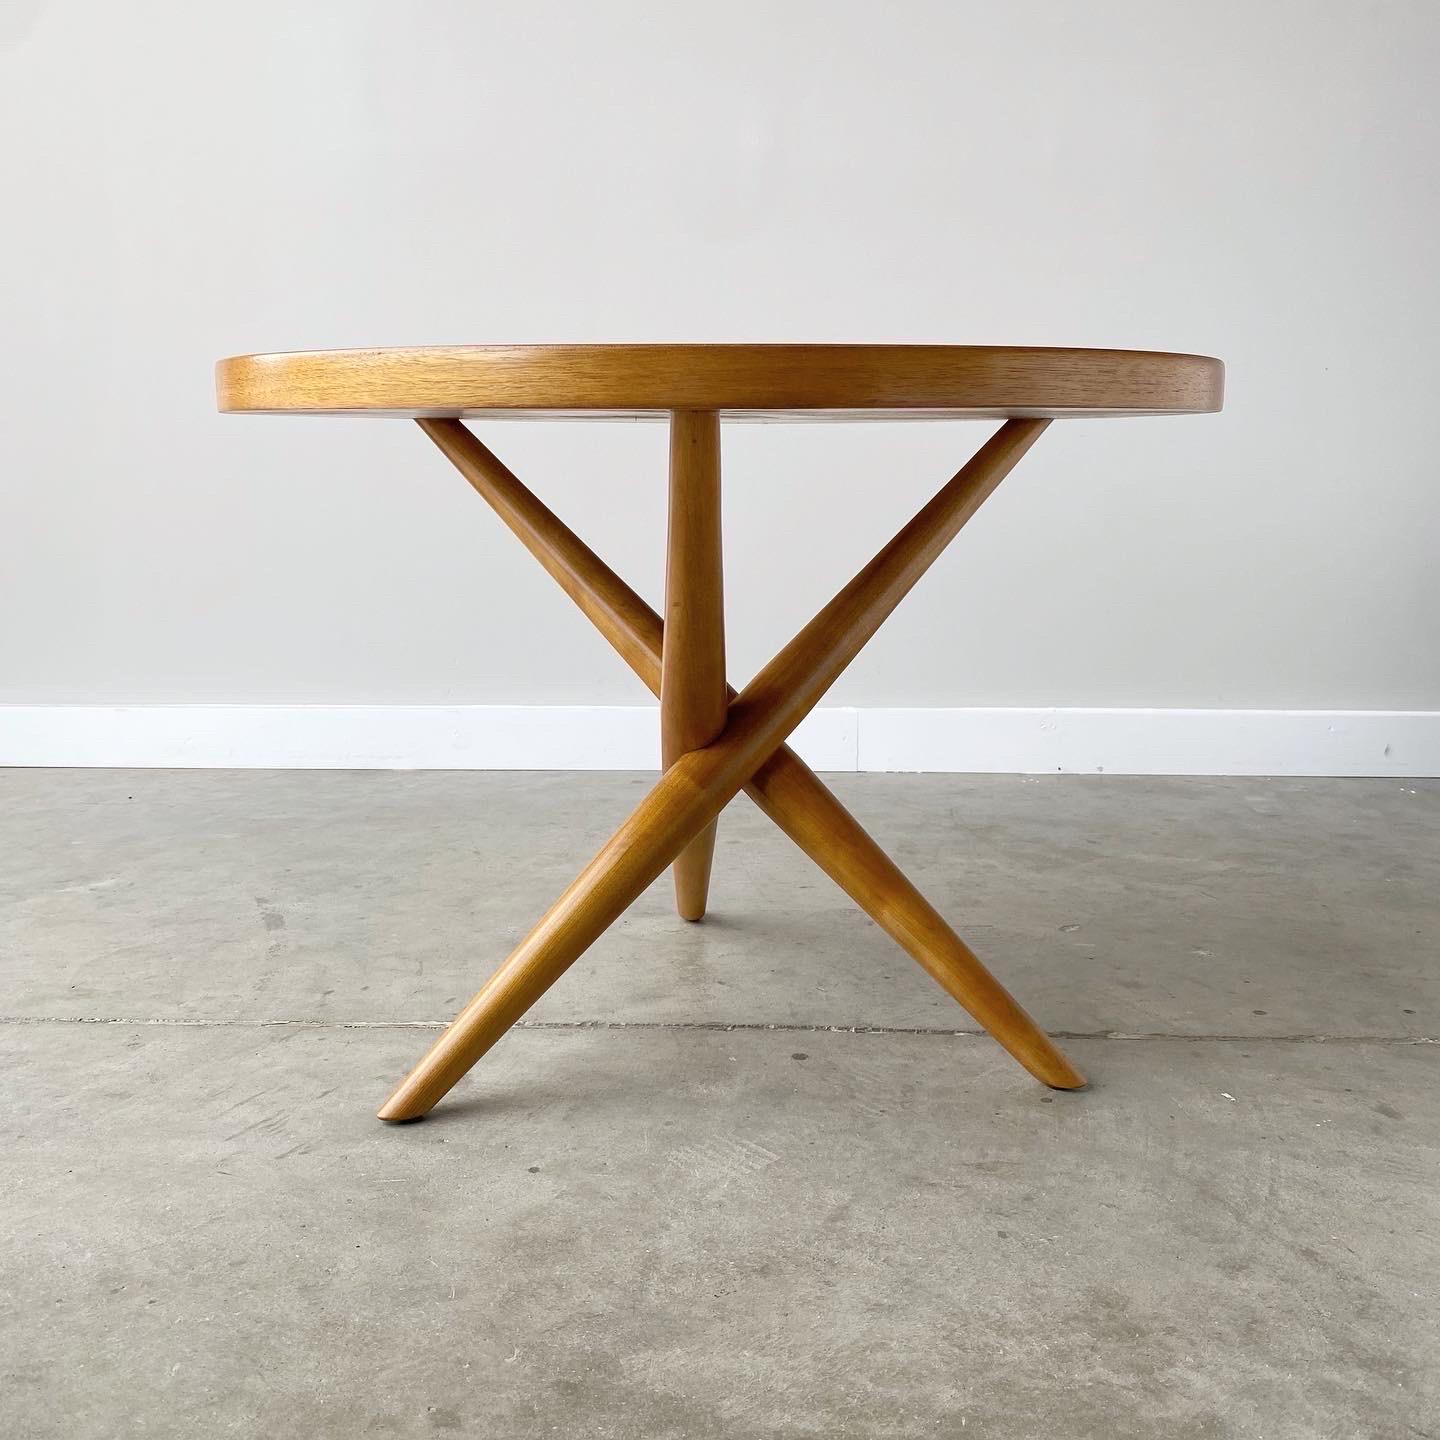 An iconic tripod table designed by T.H. Robsjohn-Gibbings for Widdicomb, 1952.

This table has been refinished professionally and features a bleached walnut top with maple legs.  